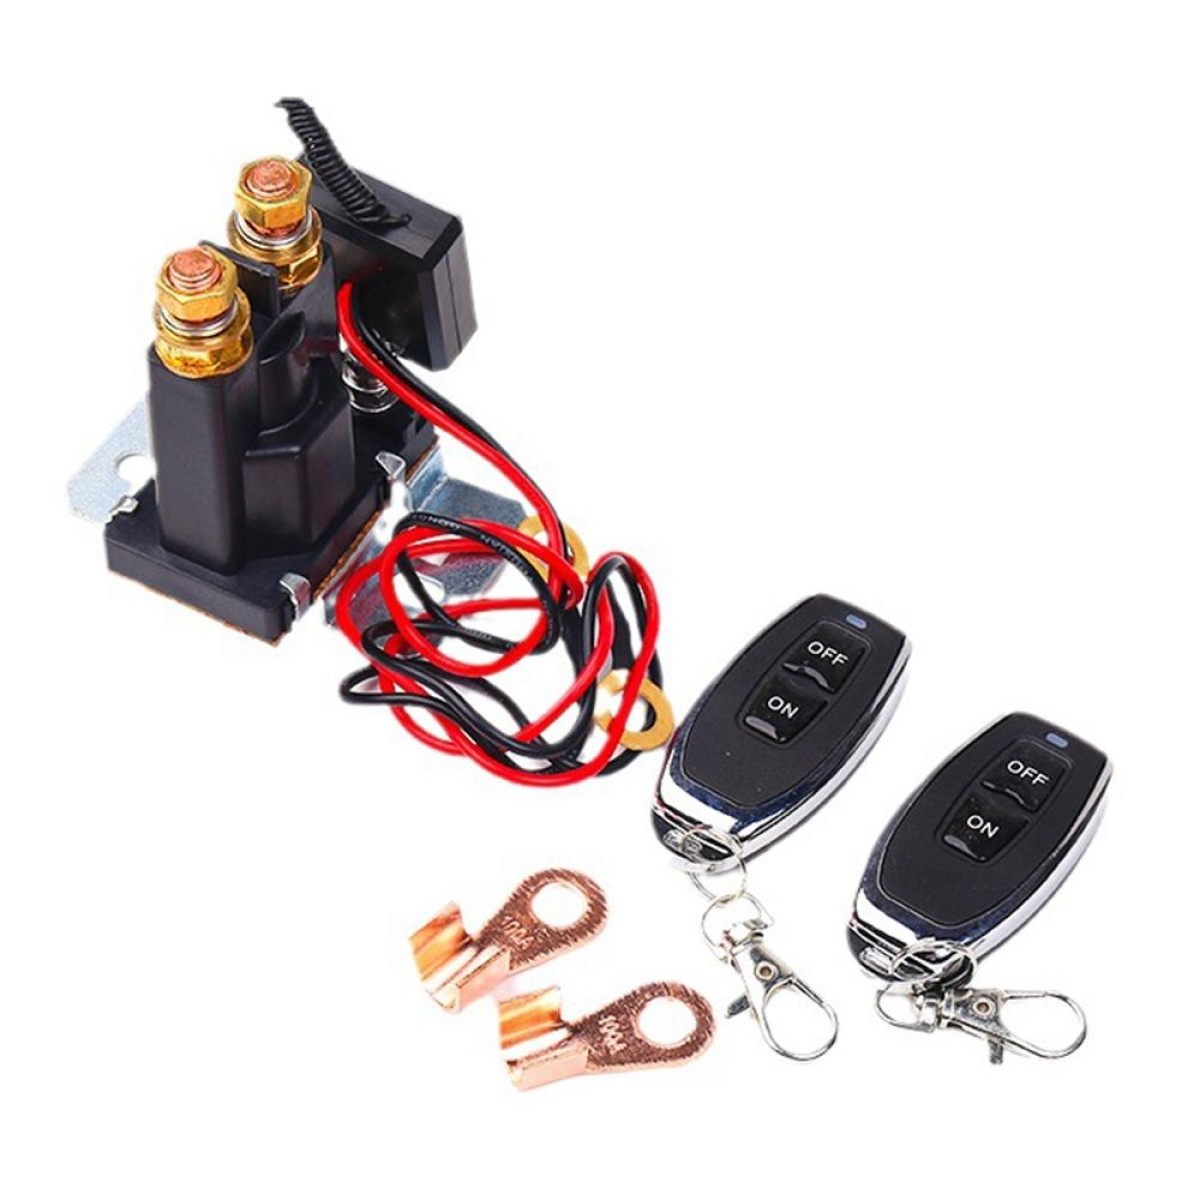 24V 500A Car Battery Remote Control Relay Rotary Switch Cut, Style:with 2 x Remote Control